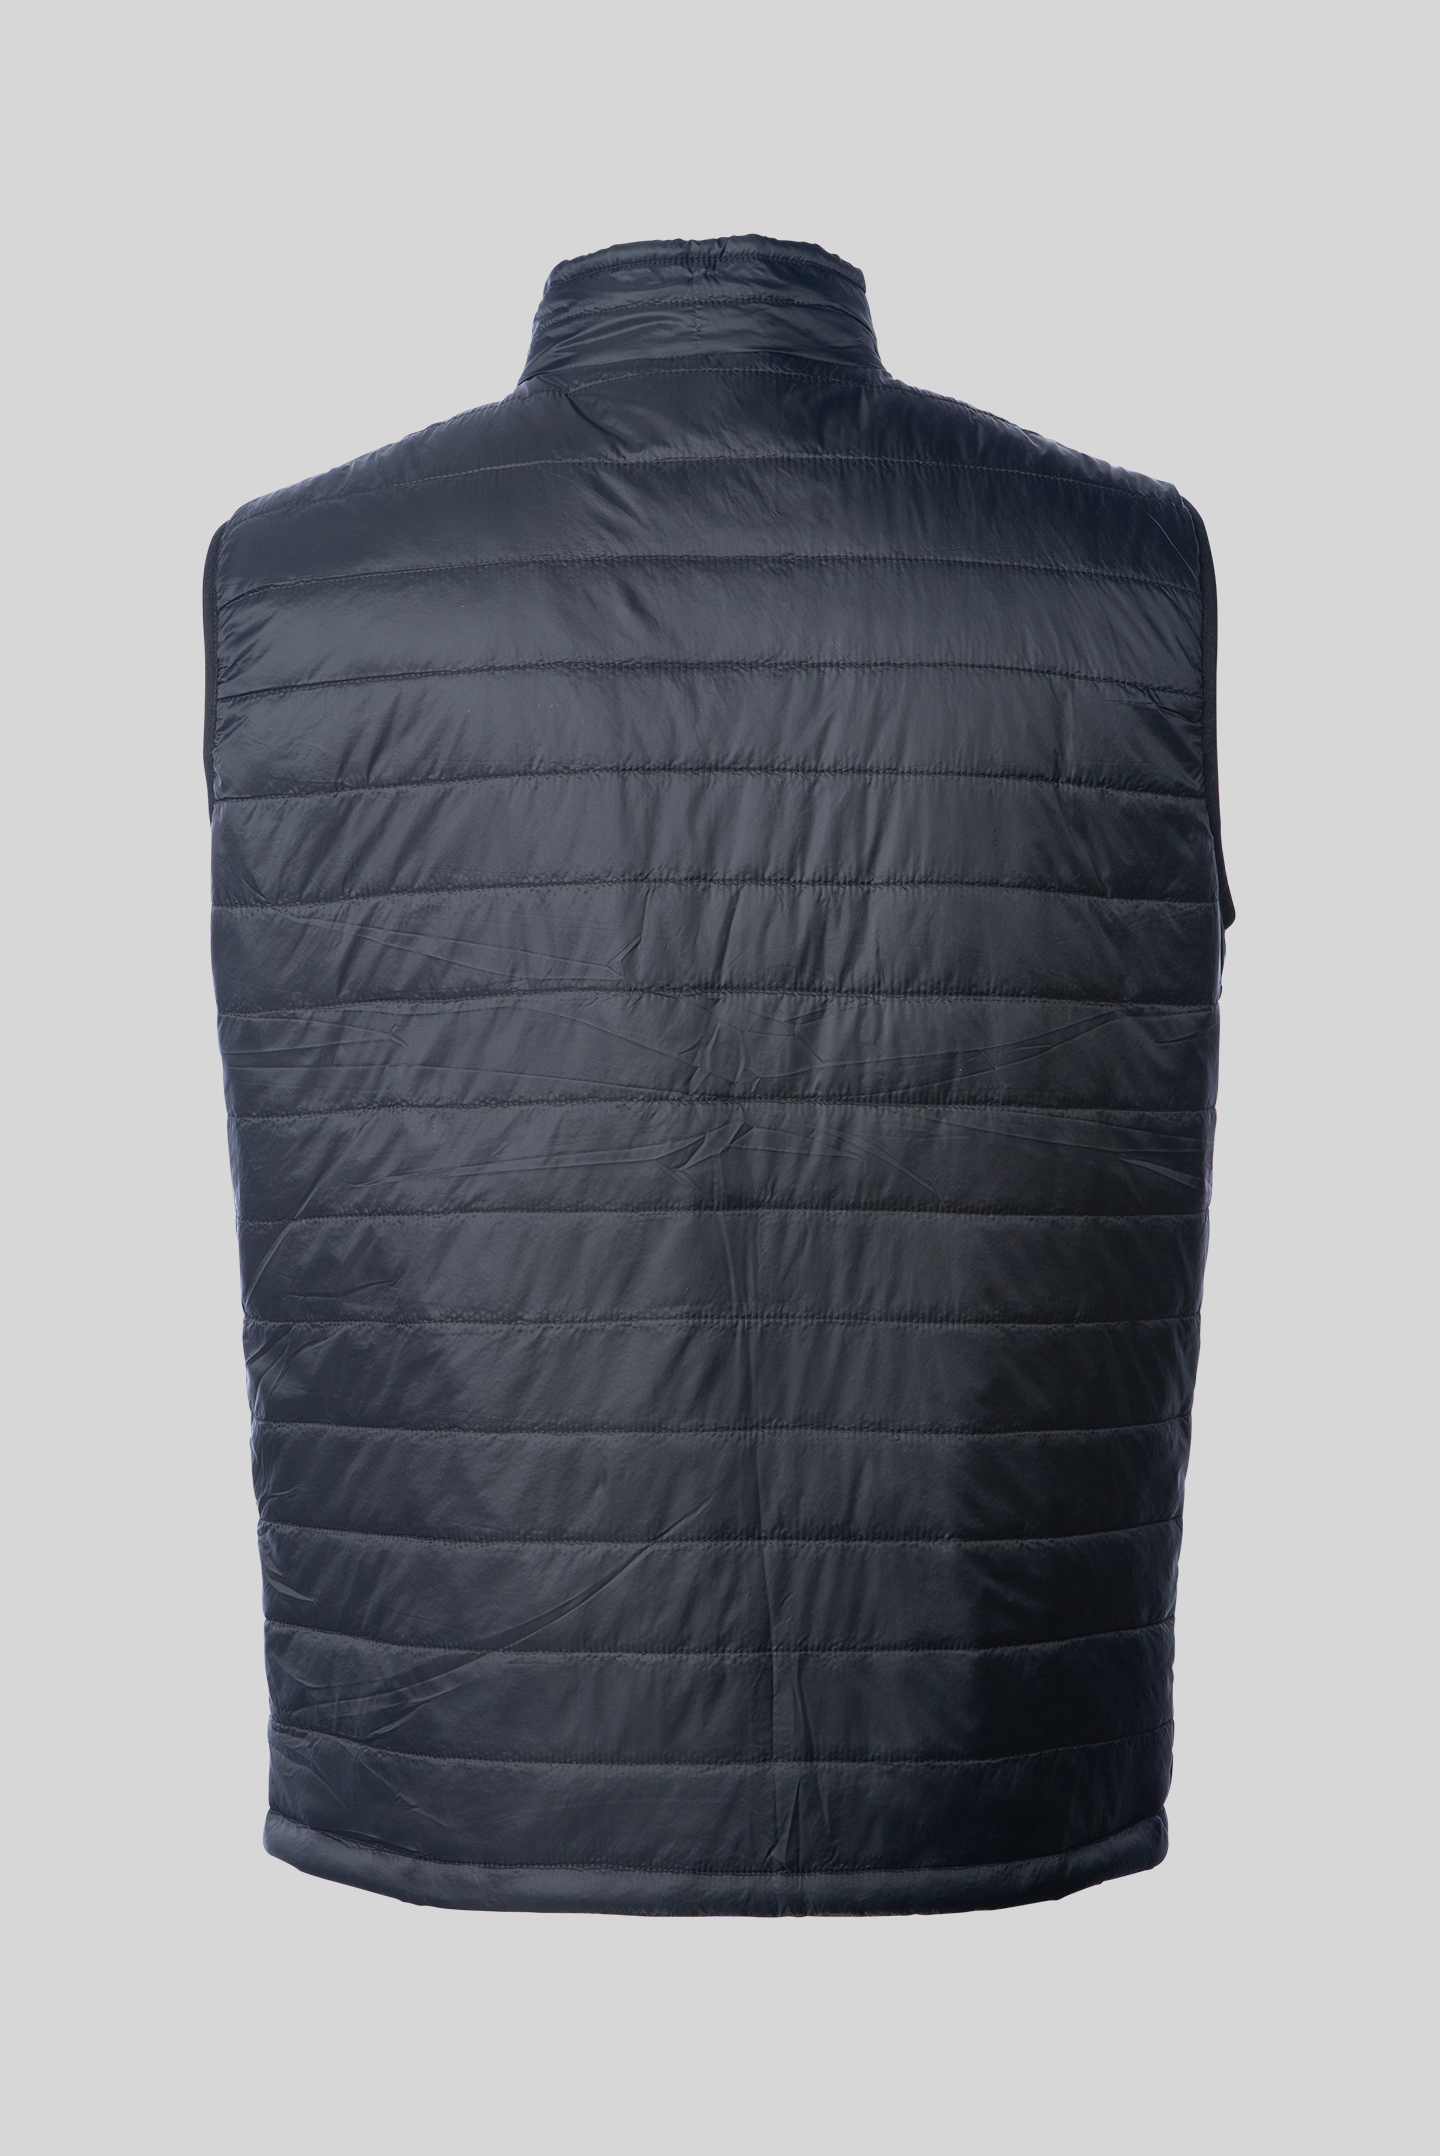 Independent Trading Co. Puffer Vest EXP120PFV Black 3XL